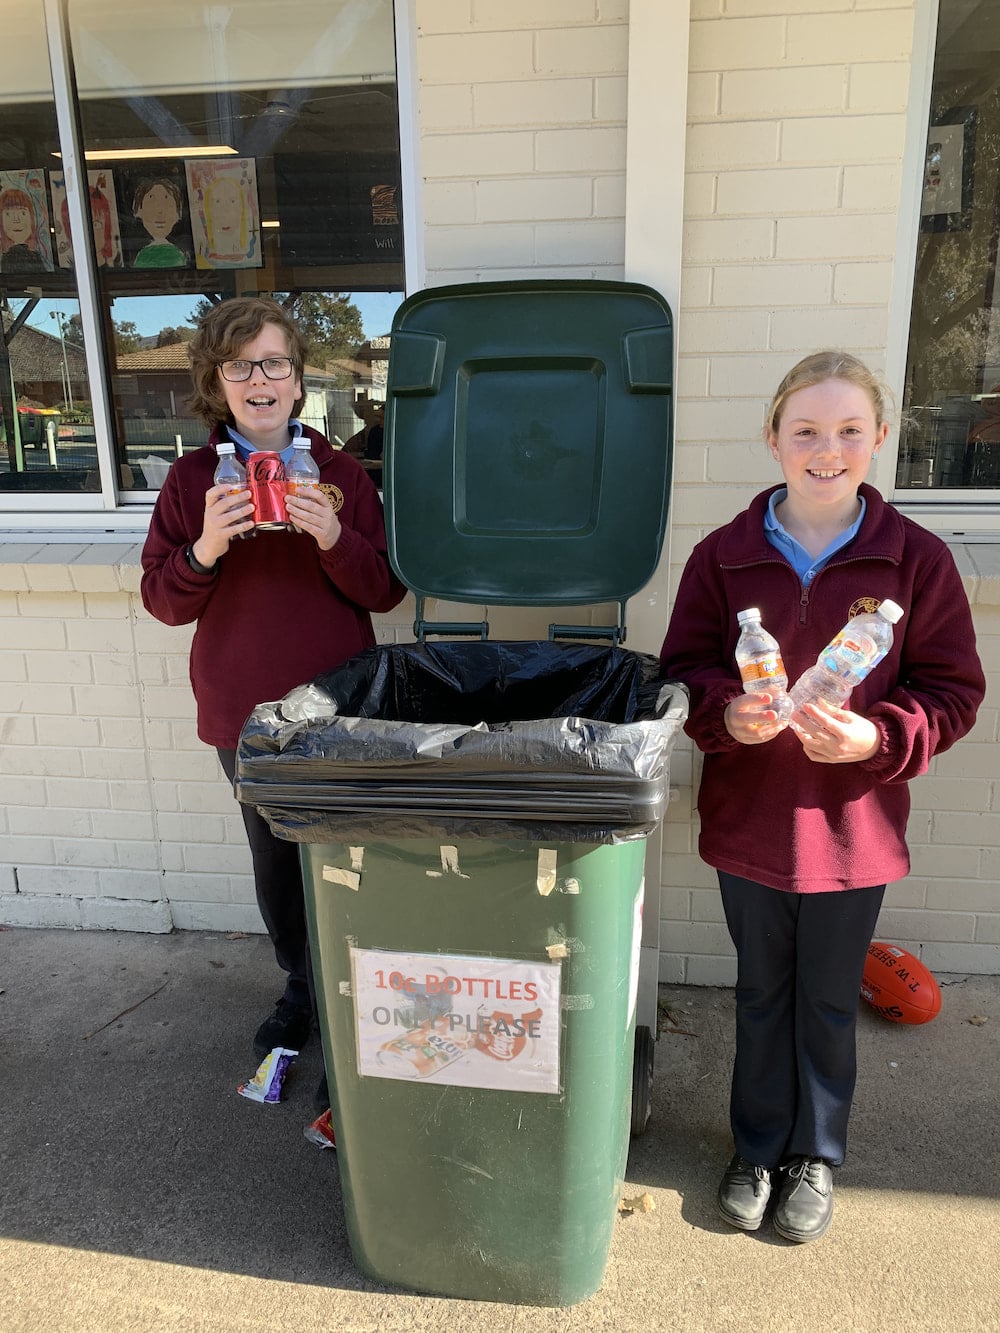 Students at St Jude's Primary School recycle containers to raise money for charity. Photo supplied